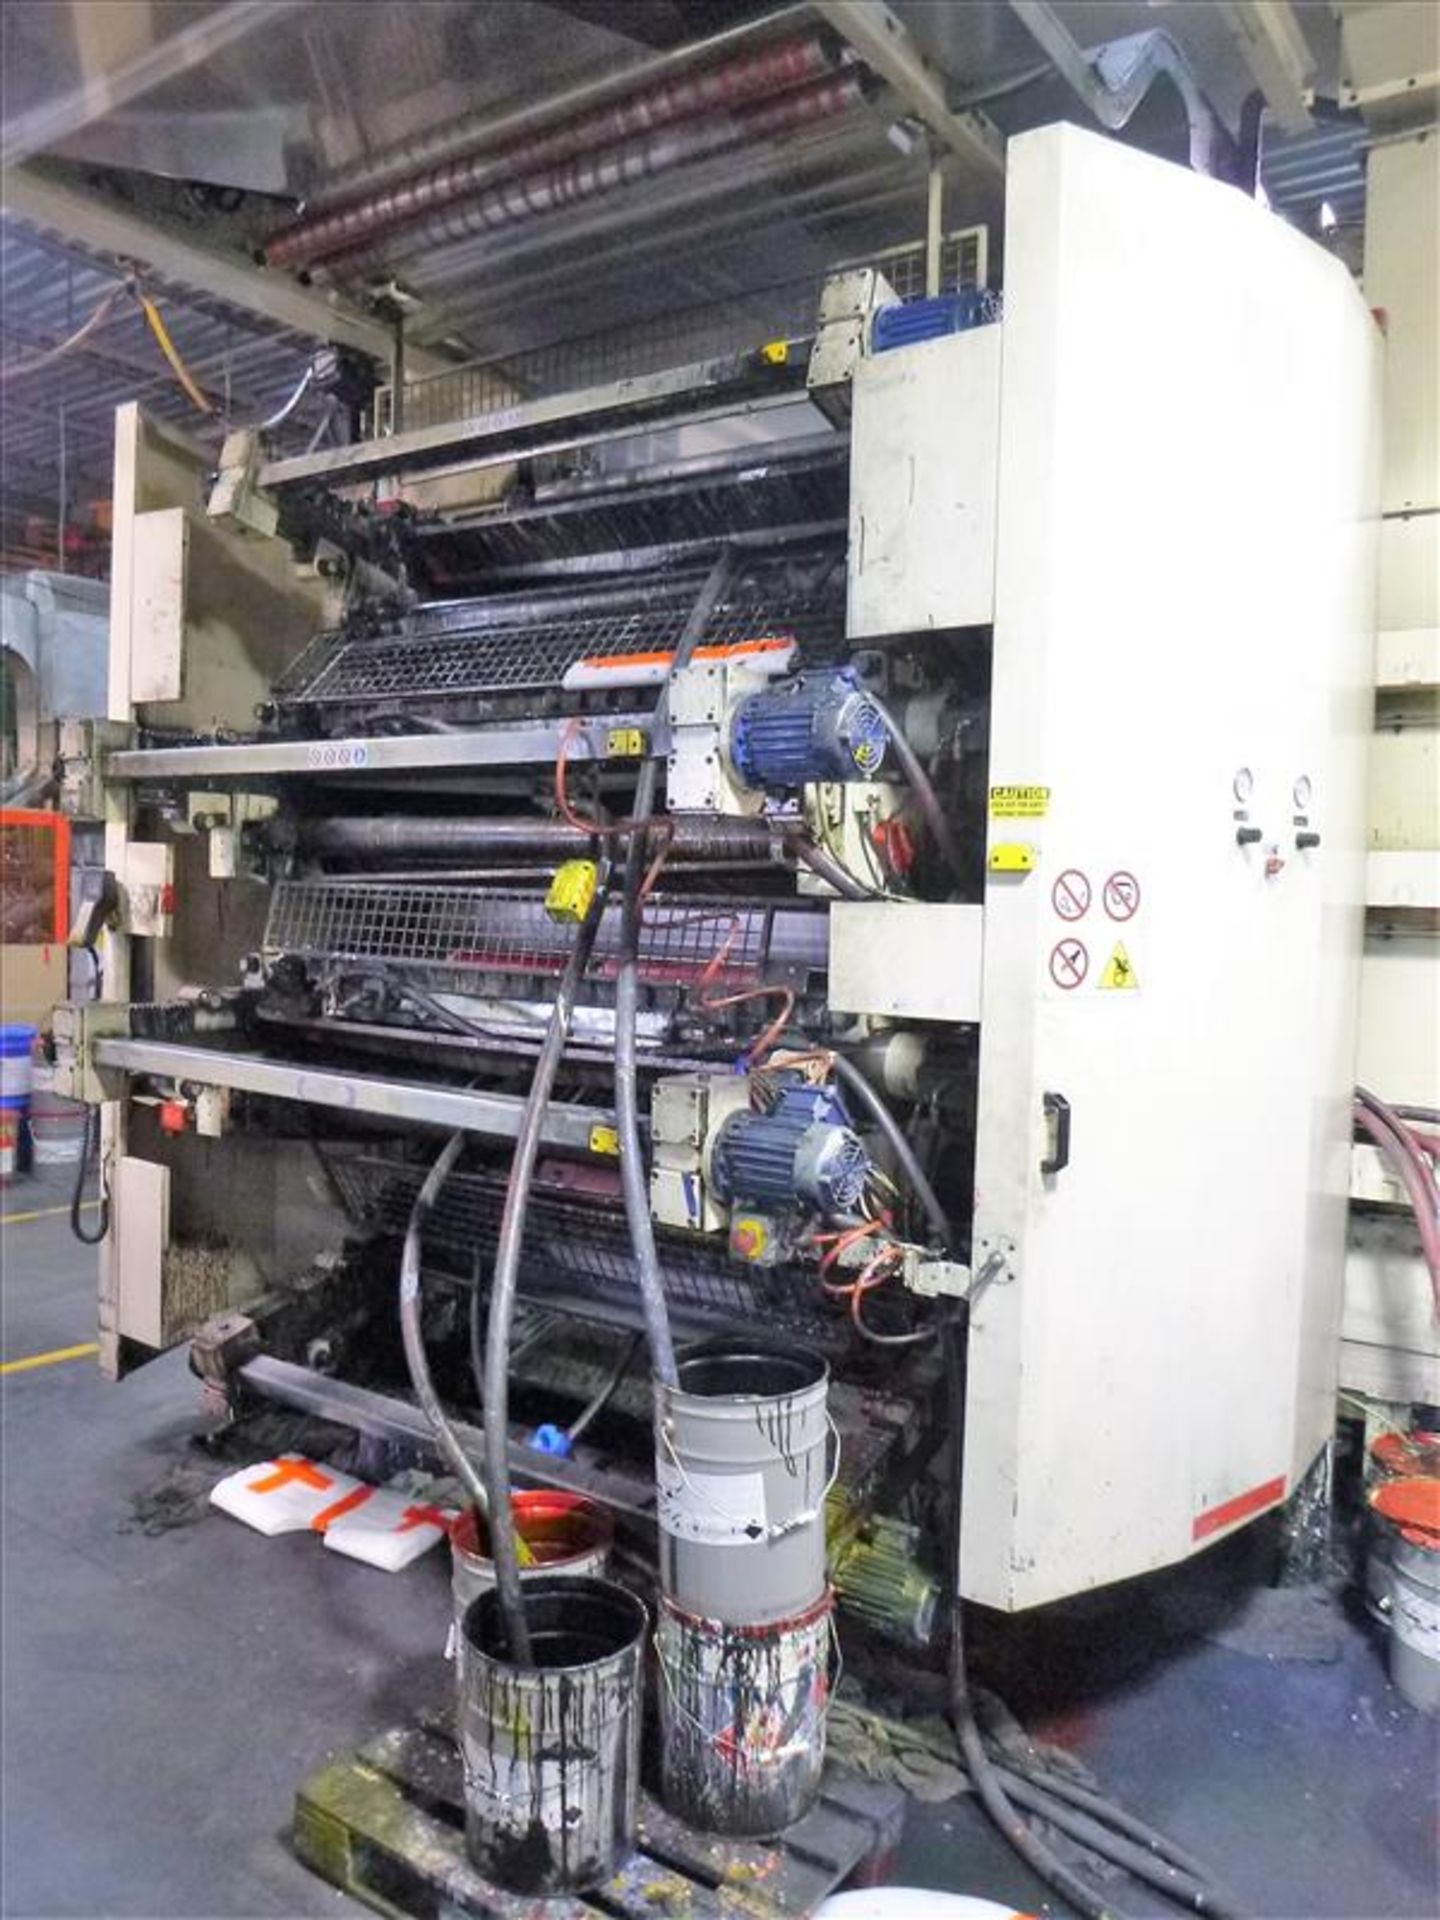 1998 Carint 8-colour central impression flexographic printing press, 59" wide, type Gemini 2008 ( - Image 13 of 64